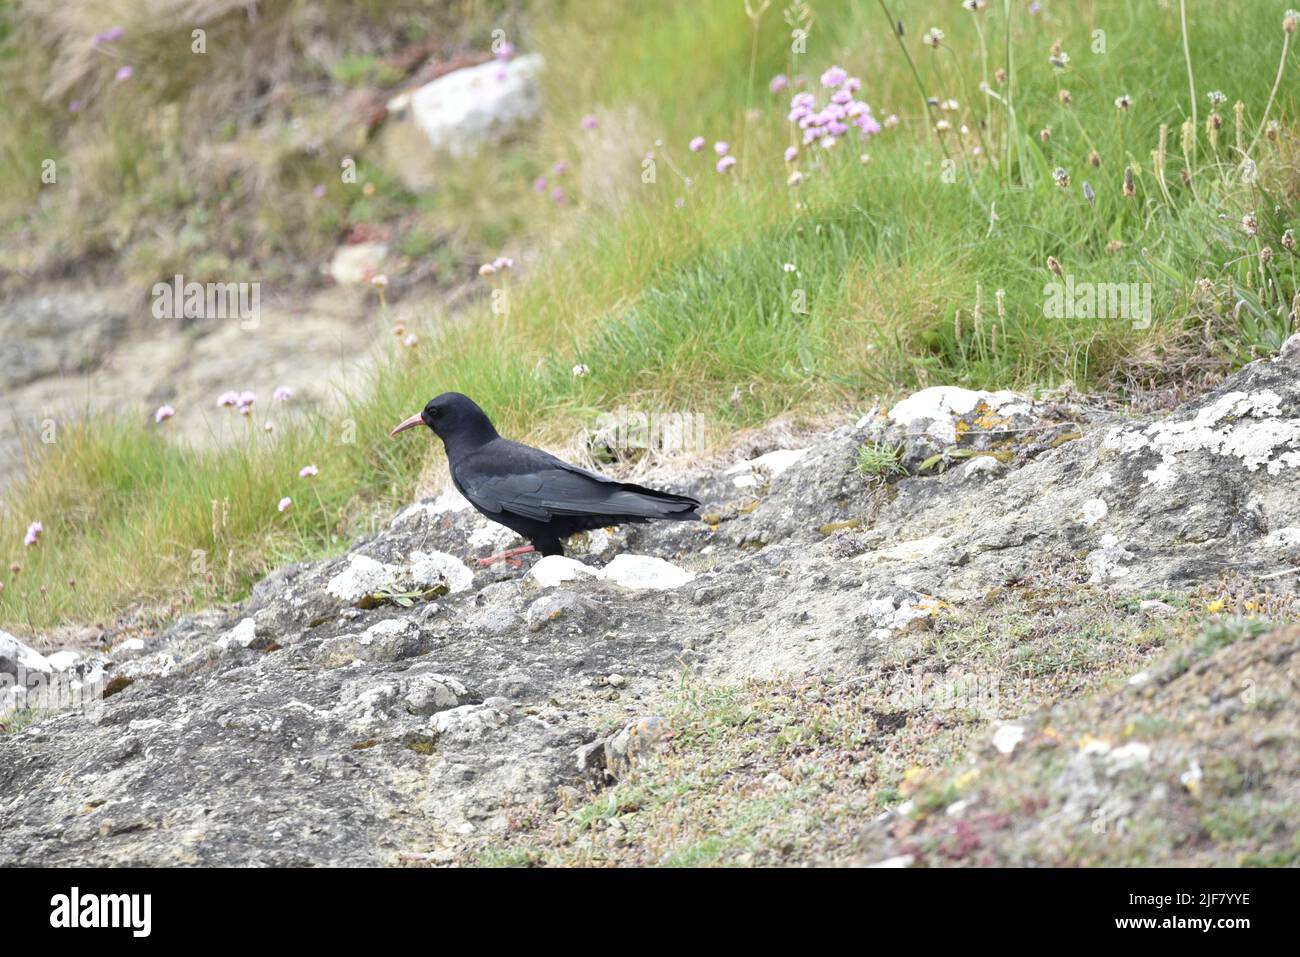 Left-Profile Foreground Image of a Red-Billed Chough (Pyrrhocorax pyrrhocorax) Walking, One Foot Forward, Over Rock Against a Grassy Rock Background Stock Photo